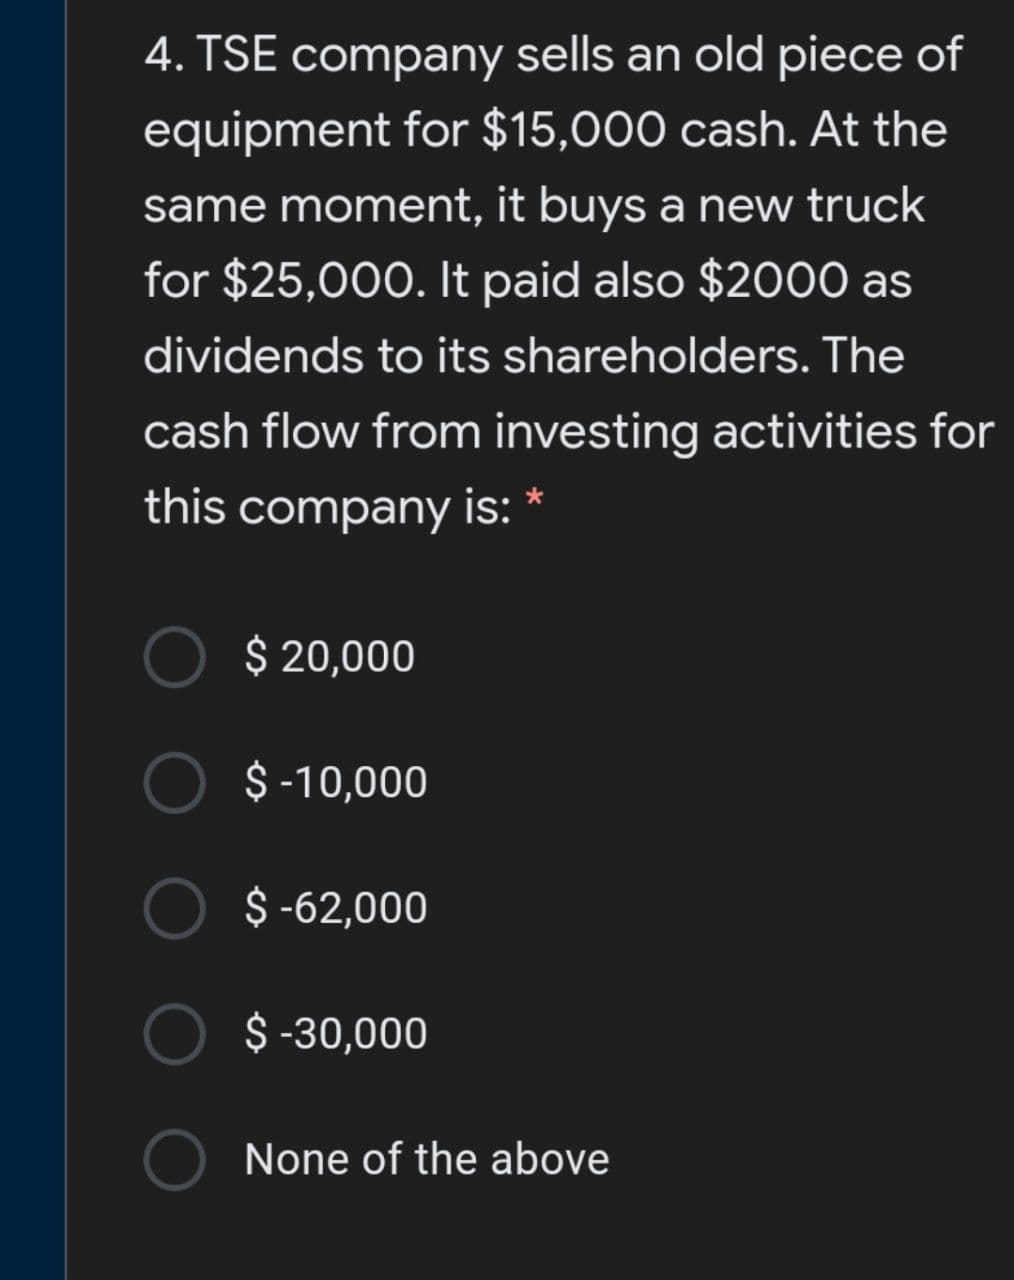 4. TSE company sells an old piece of
equipment for $15,000 cash. At the
same moment, it buys a new truck
for $25,000. It paid also $2000 as
dividends to its shareholders. The
cash flow from investing activities for
this company is: *
$ 20,000
$ -10,000
$ -62,000
$ -30,000
None of the above
